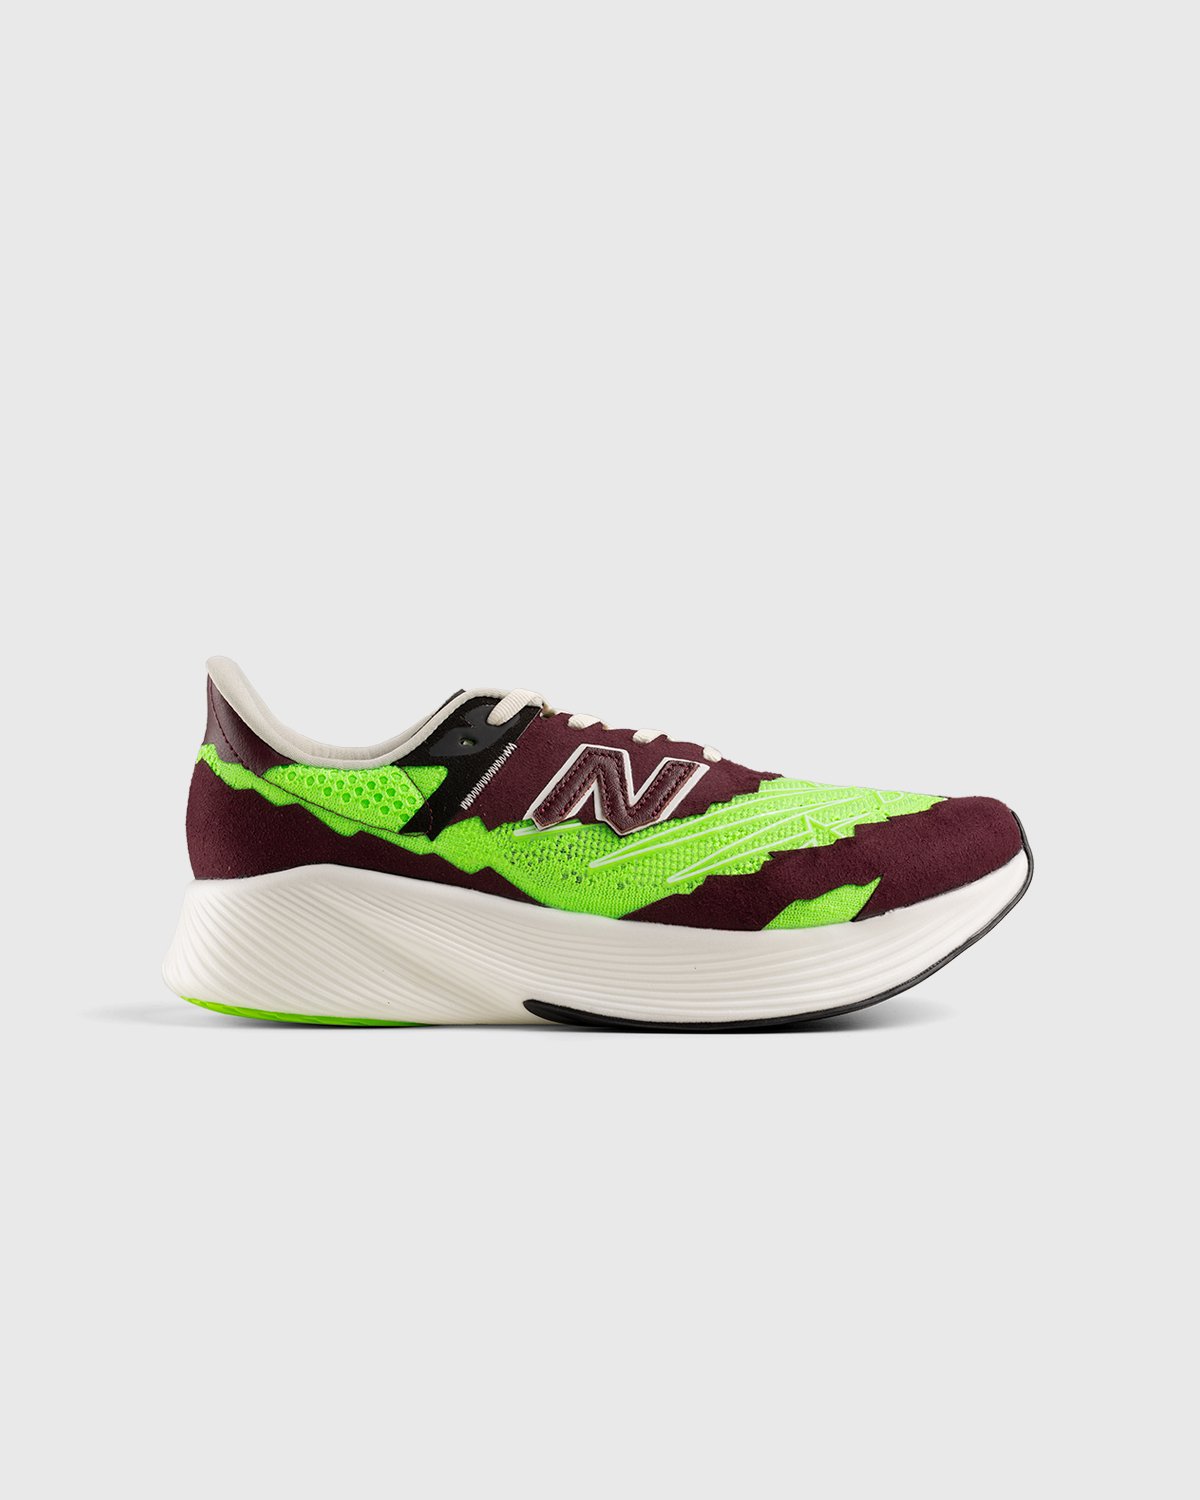 New Balance x Stone Island - FuelCell RC Elite v2 Energy Lime - Footwear - Green - Image 1